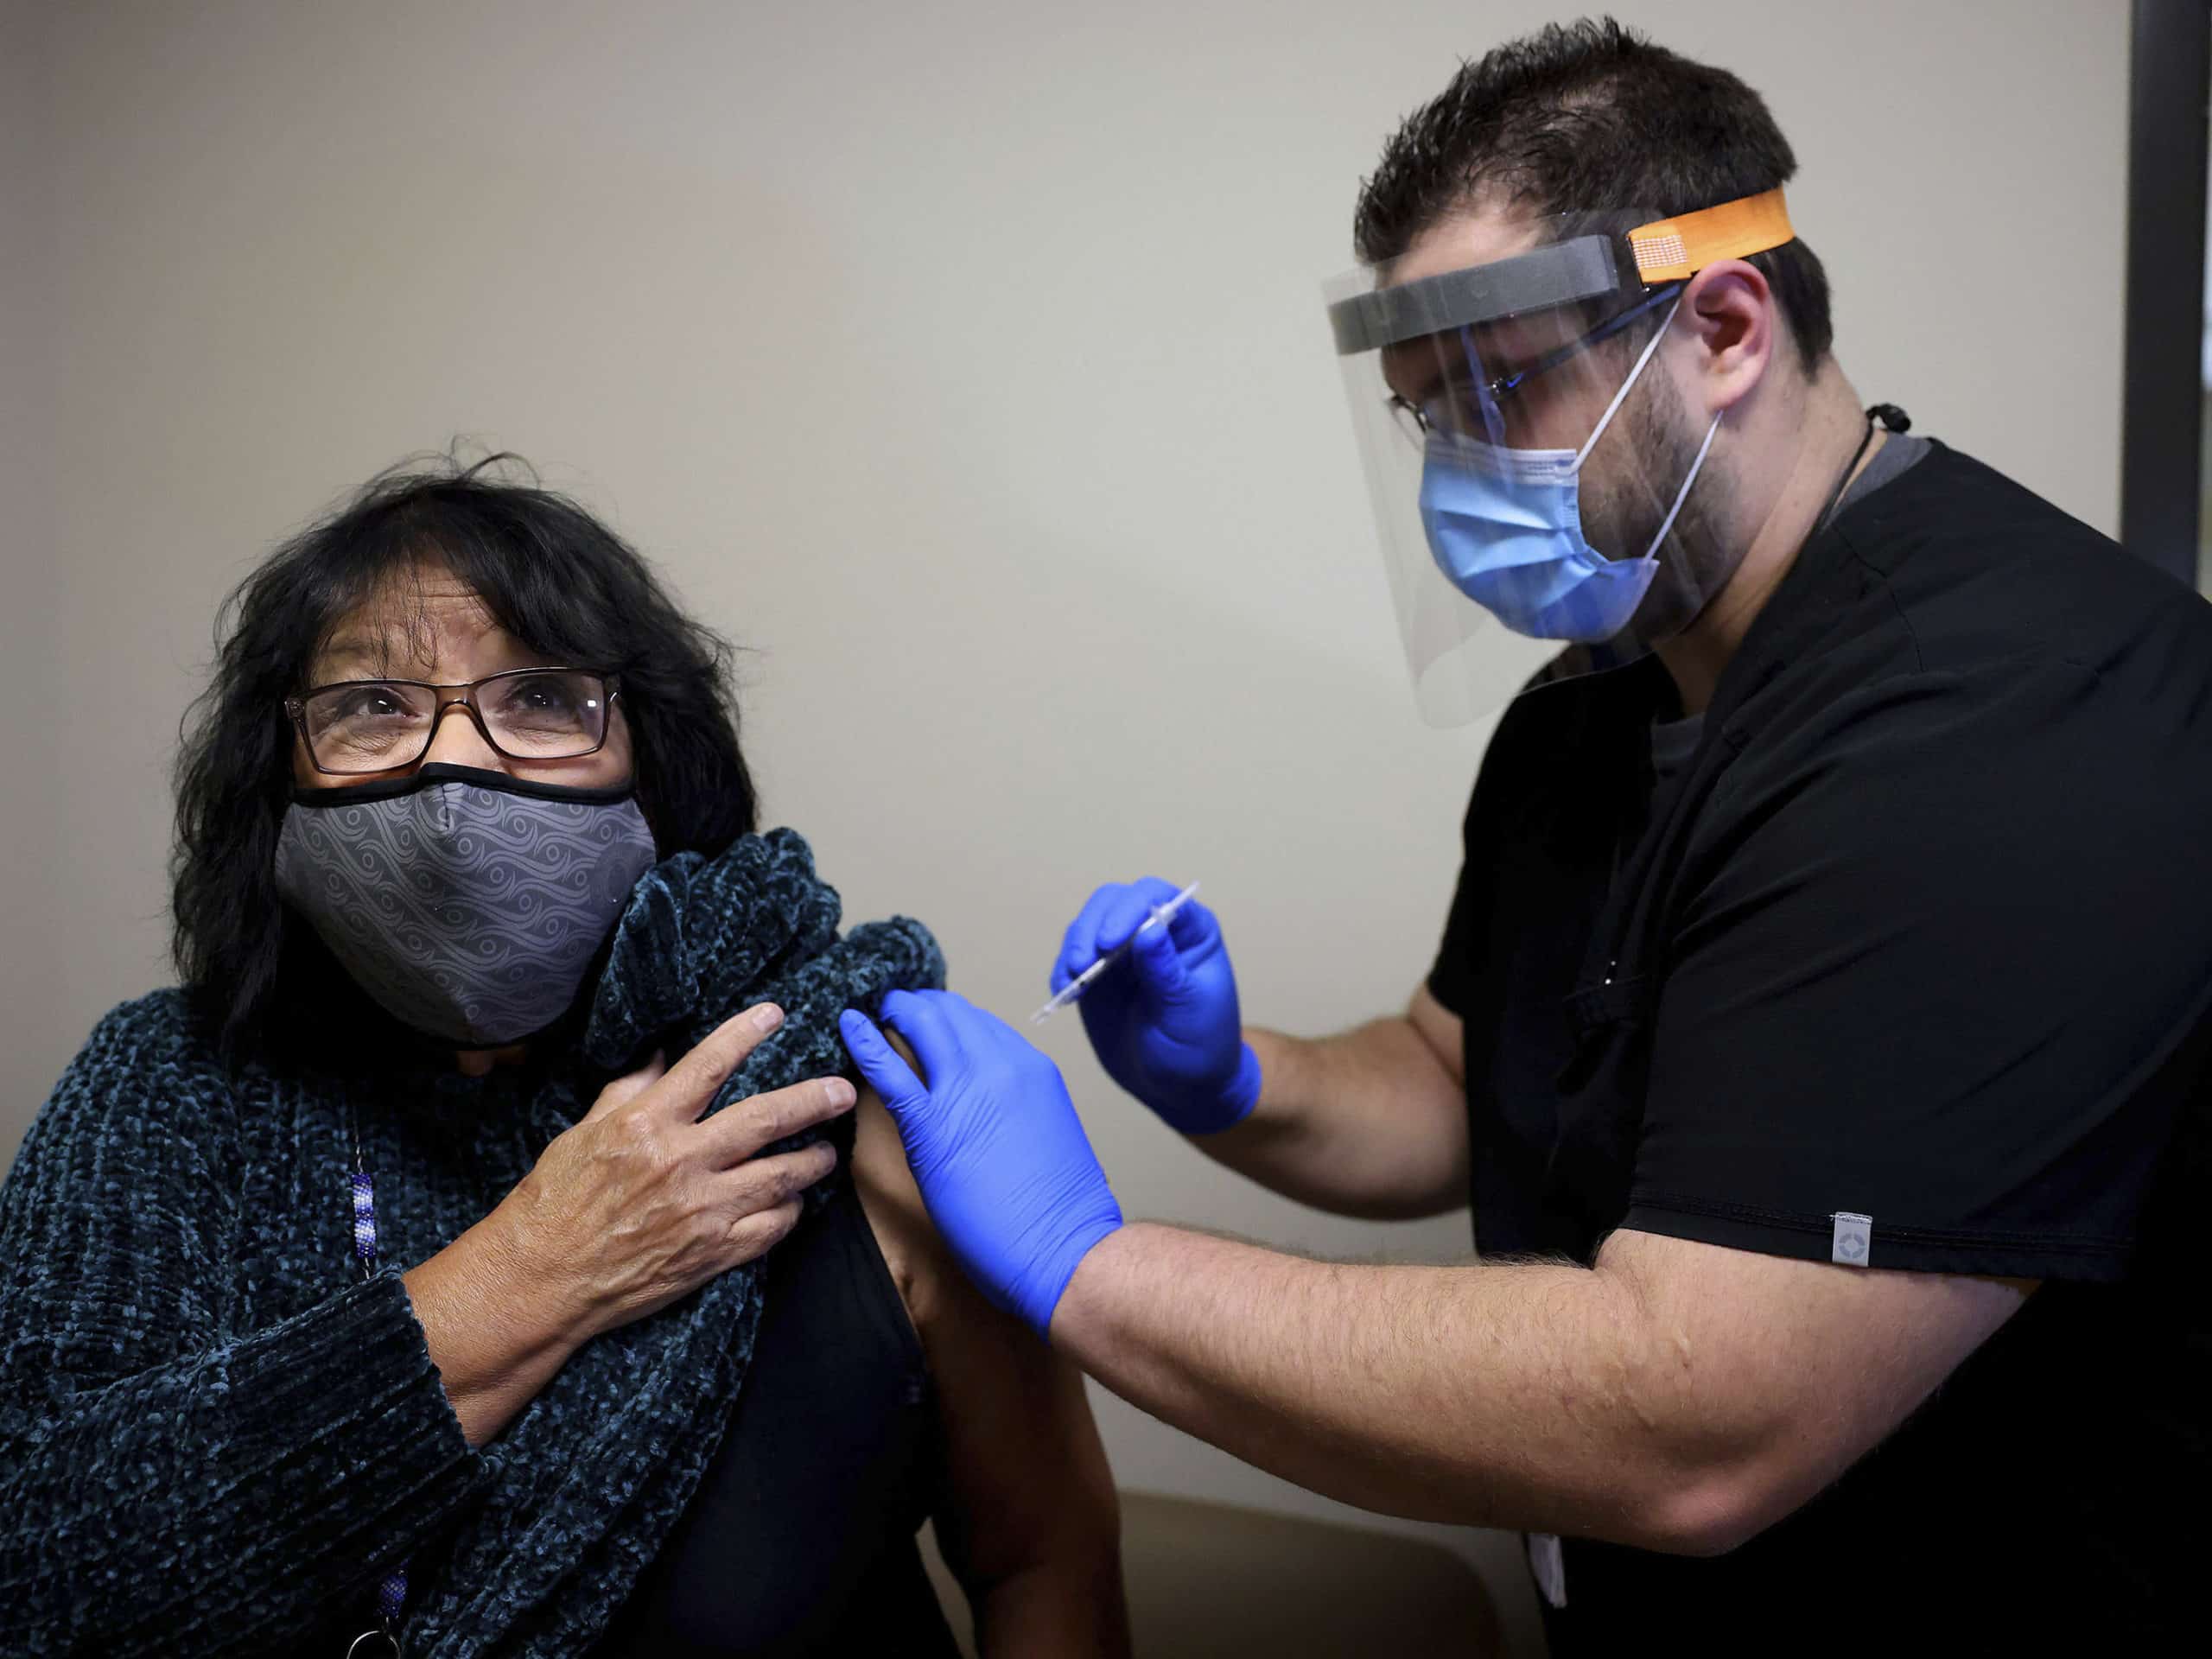 Cherokee-Strives-Complete-Vaccination-For-The-Community-Health-scaled